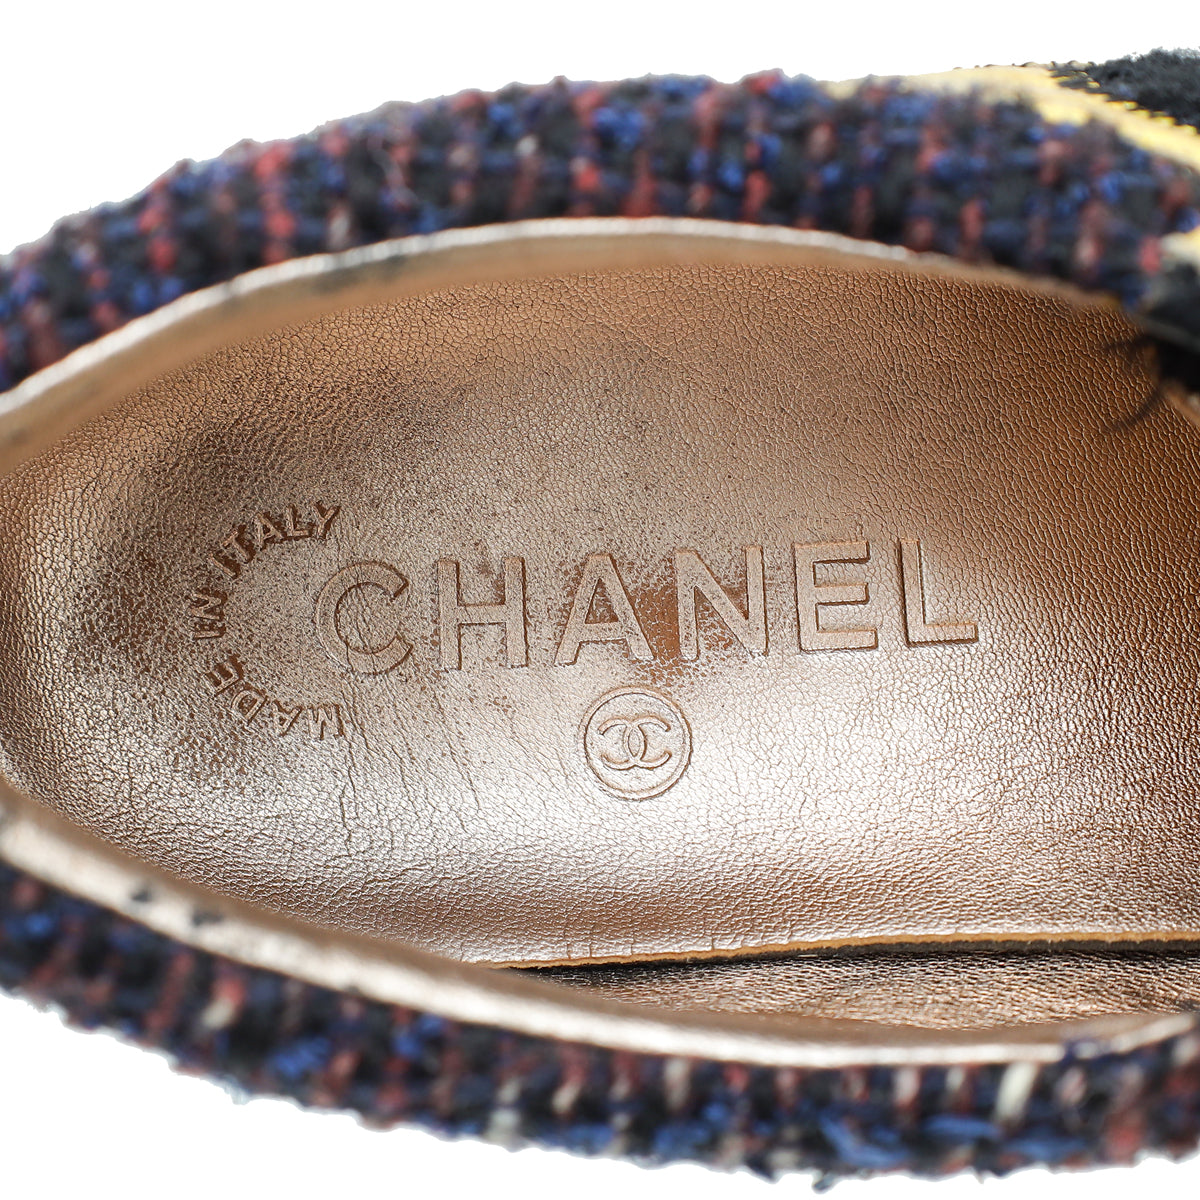 Chanel Tricolor Tweed Lace Up Sneakers 38.5